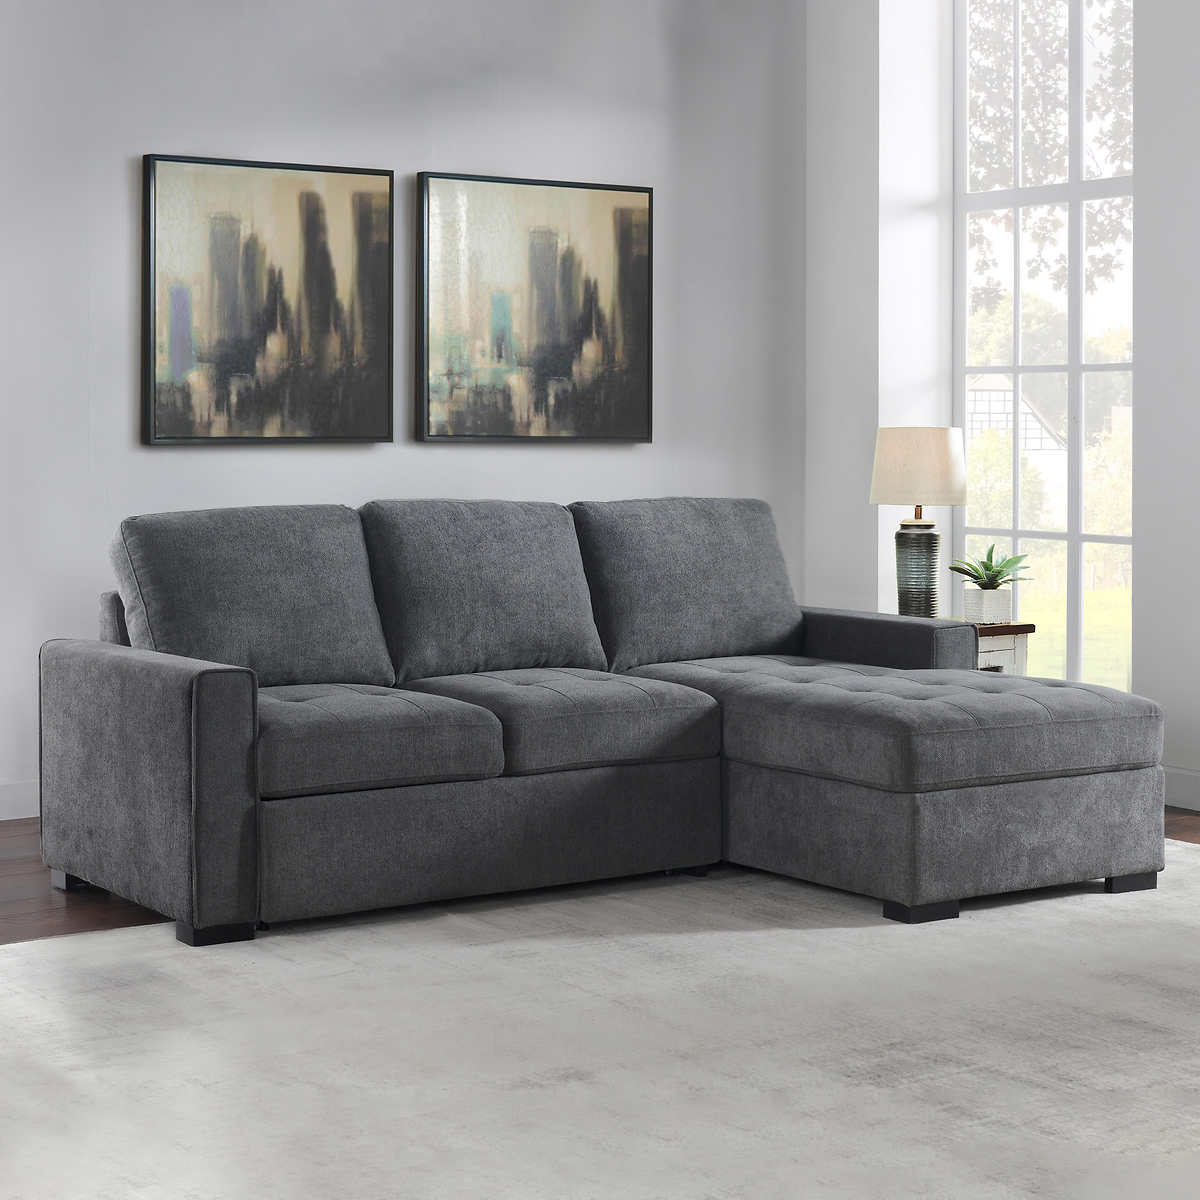 Kendale Sleeper Sofa With Storage, Bandlon Sofa Chaise With Pull Out Sleeper And Storage Bed